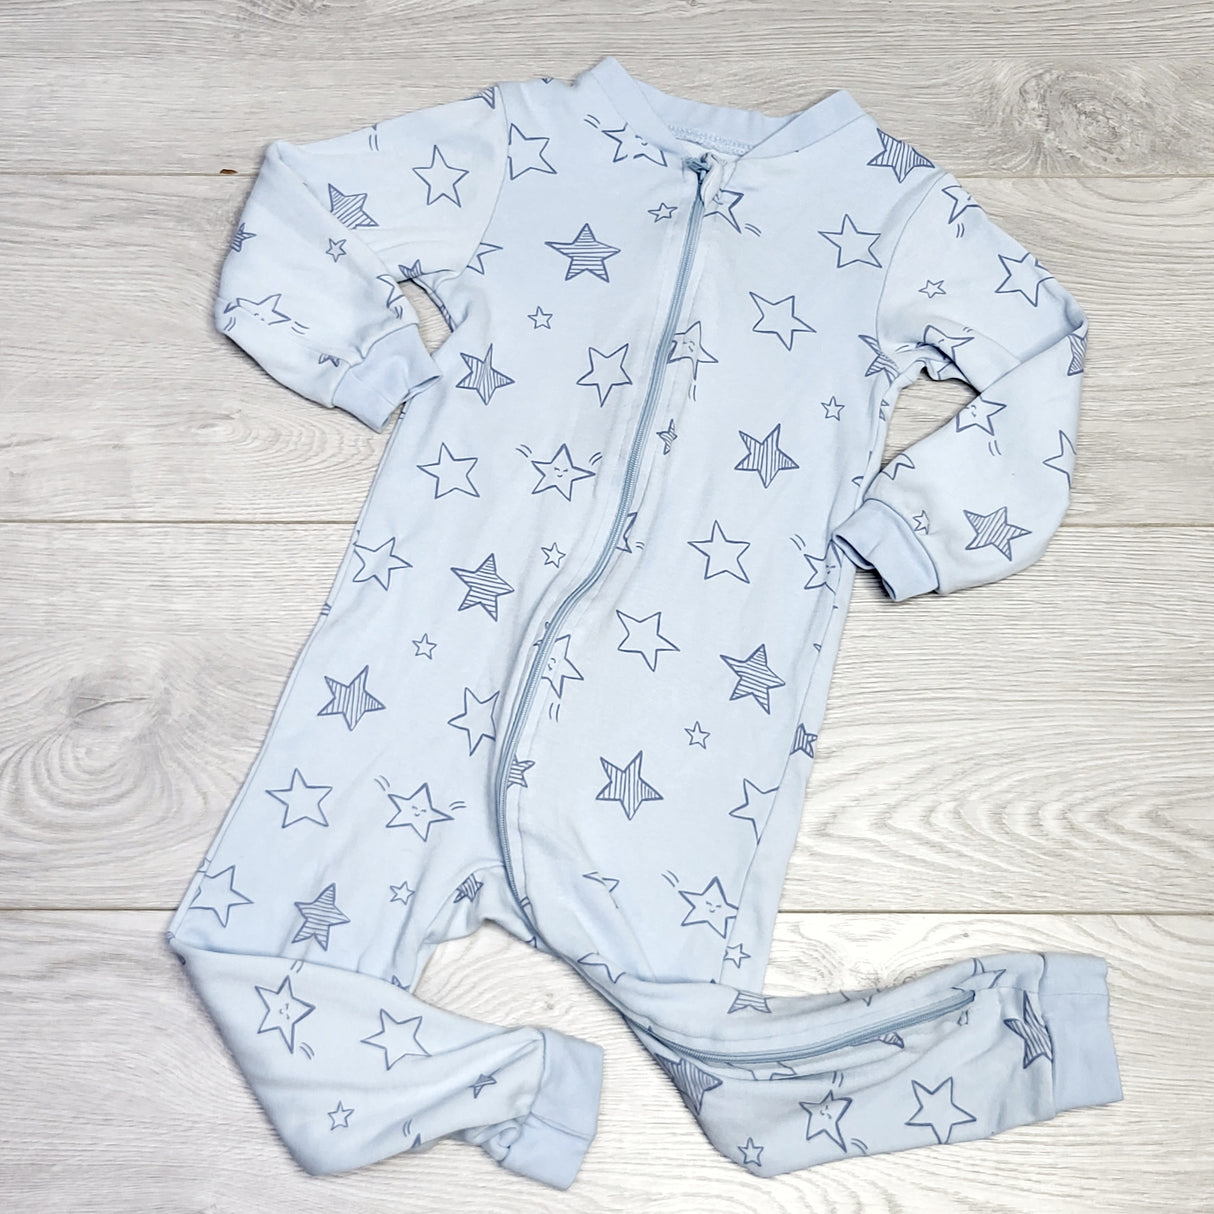 MSNDS11 - George blue zippered cotton sleeper with stars. size 3T